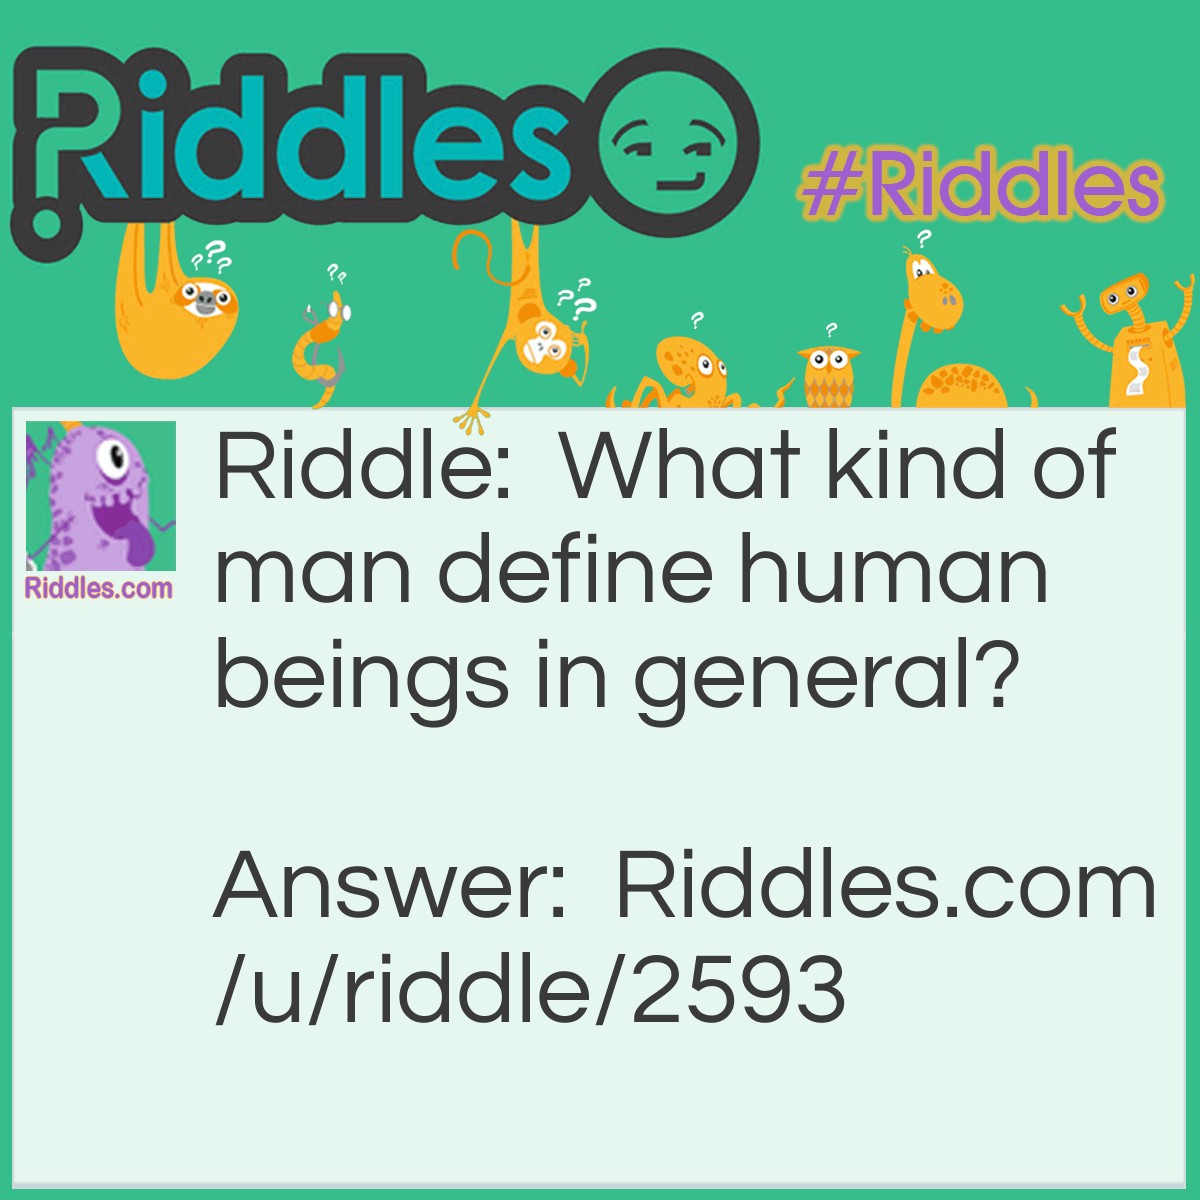 Riddle: What kind of man define human beings in general? Answer: Men.